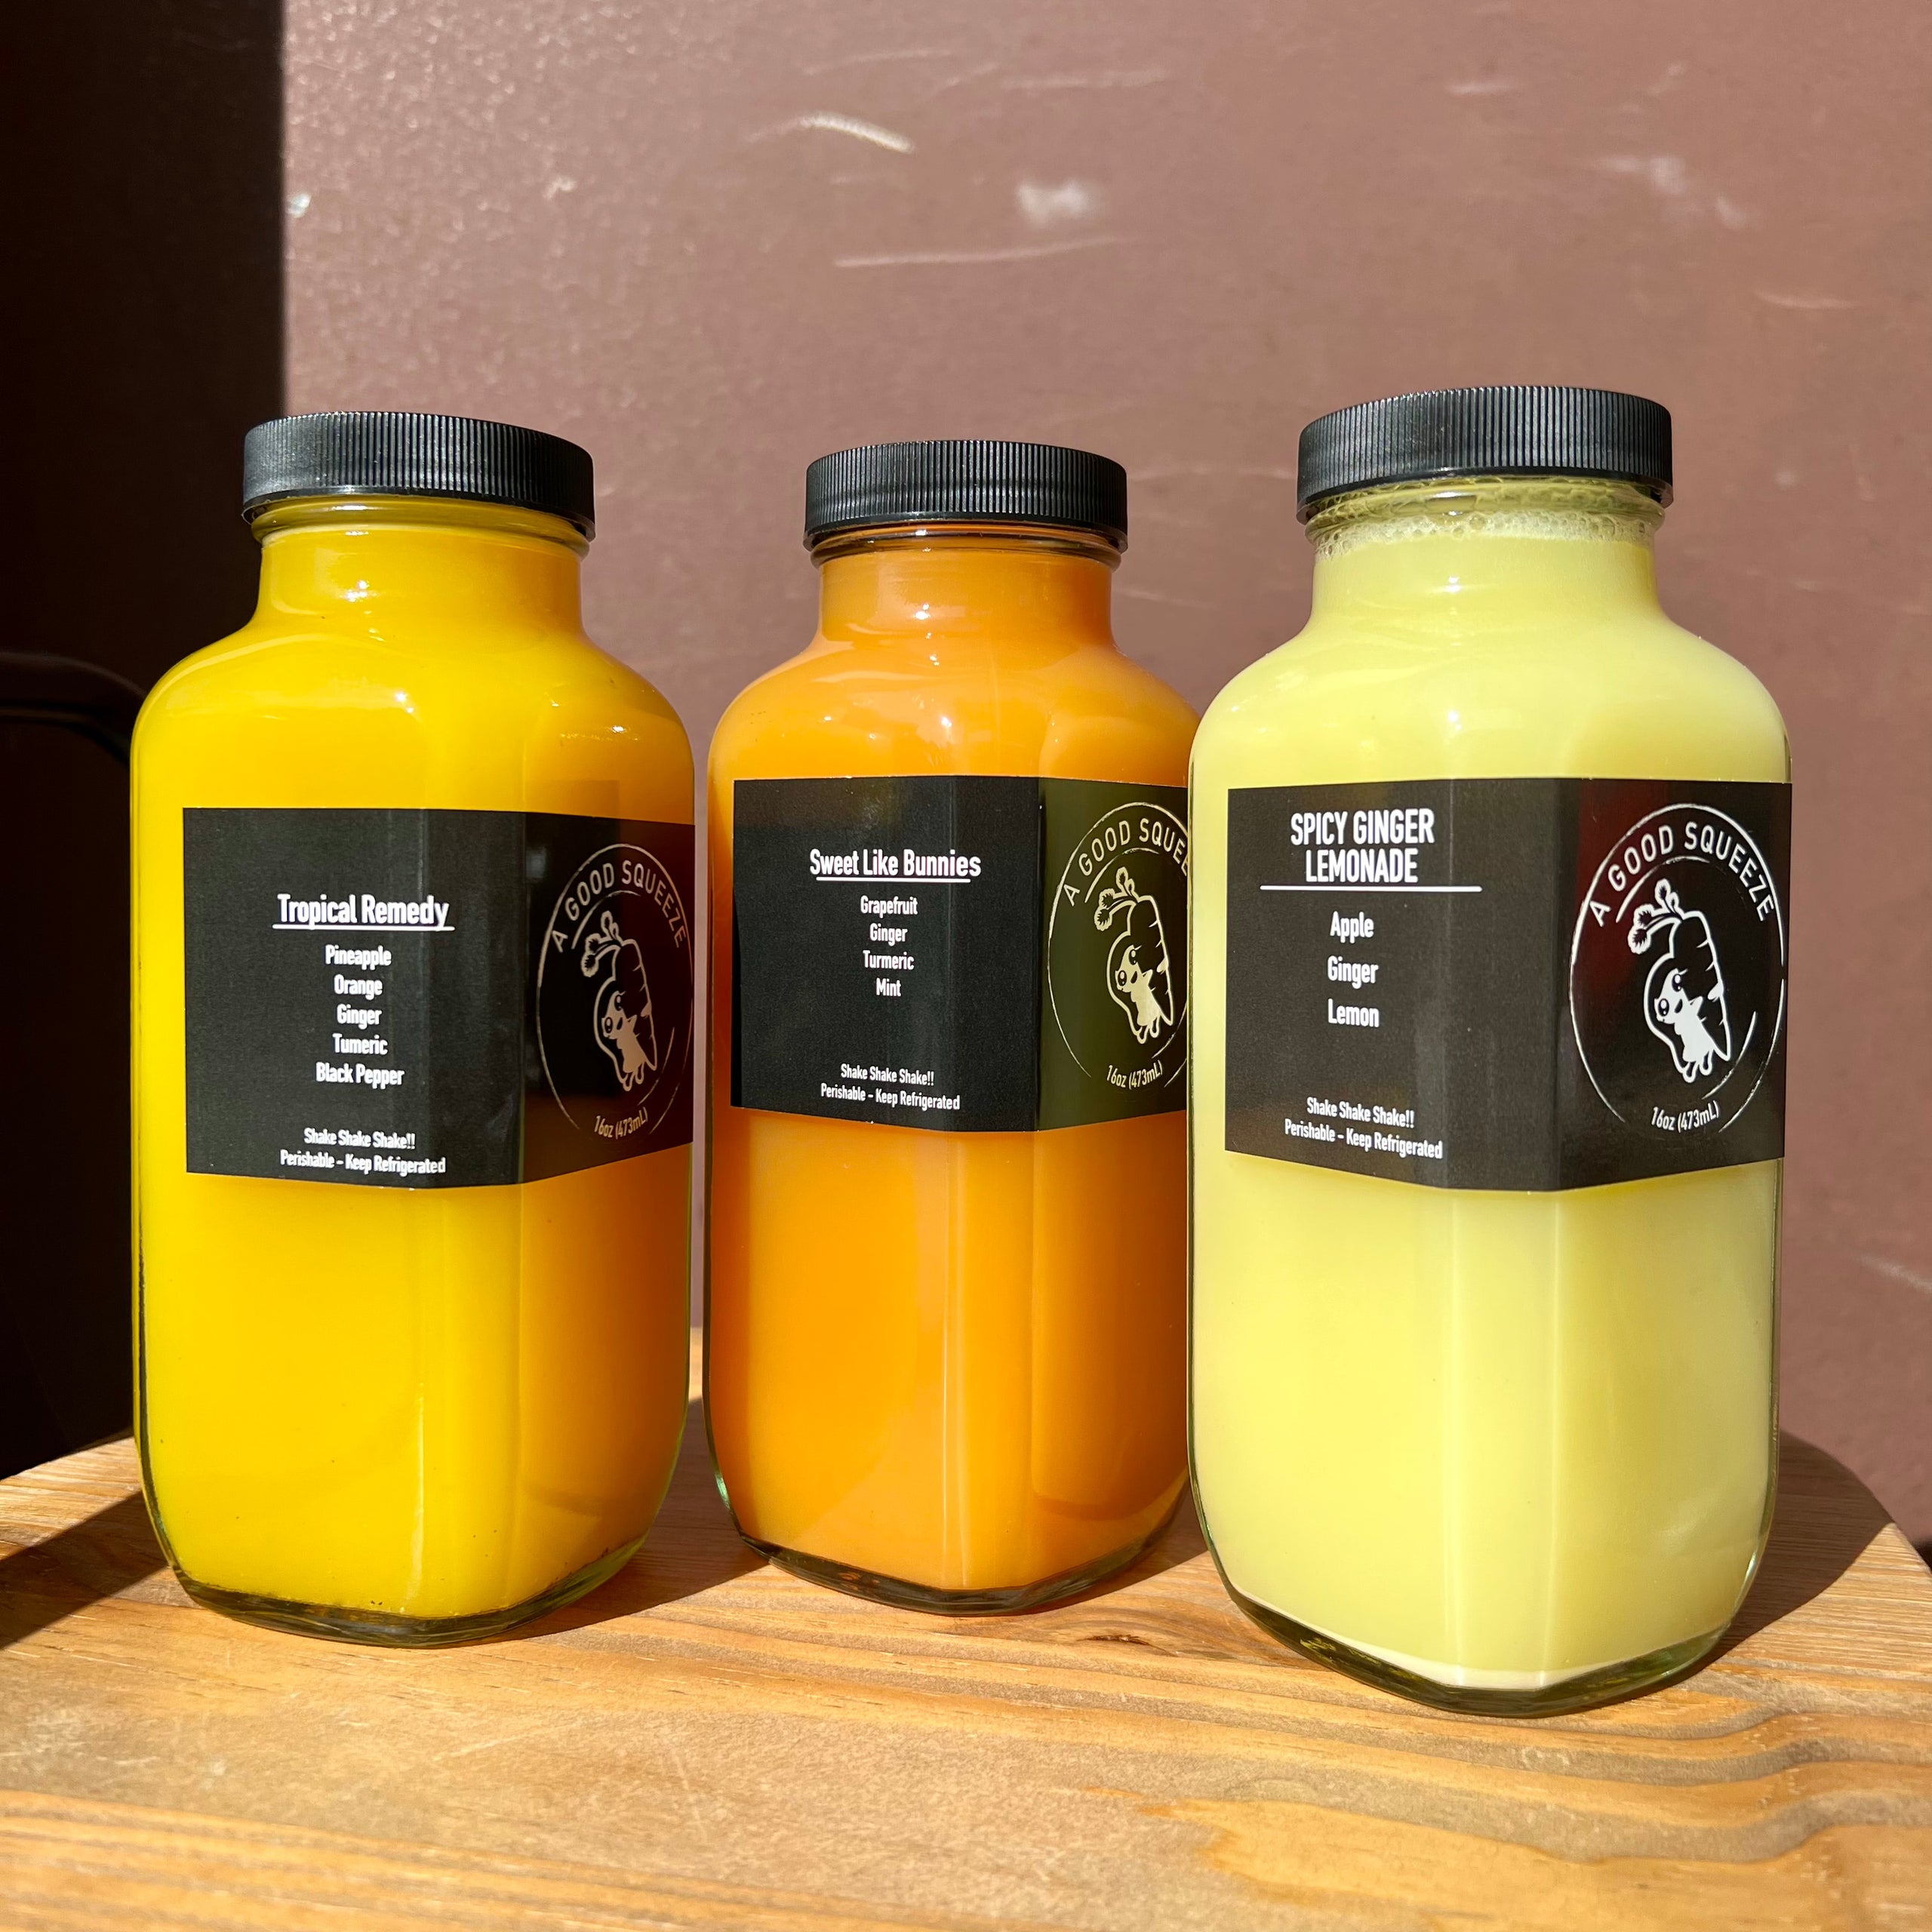 Fresh Pressed Juices - Housemade